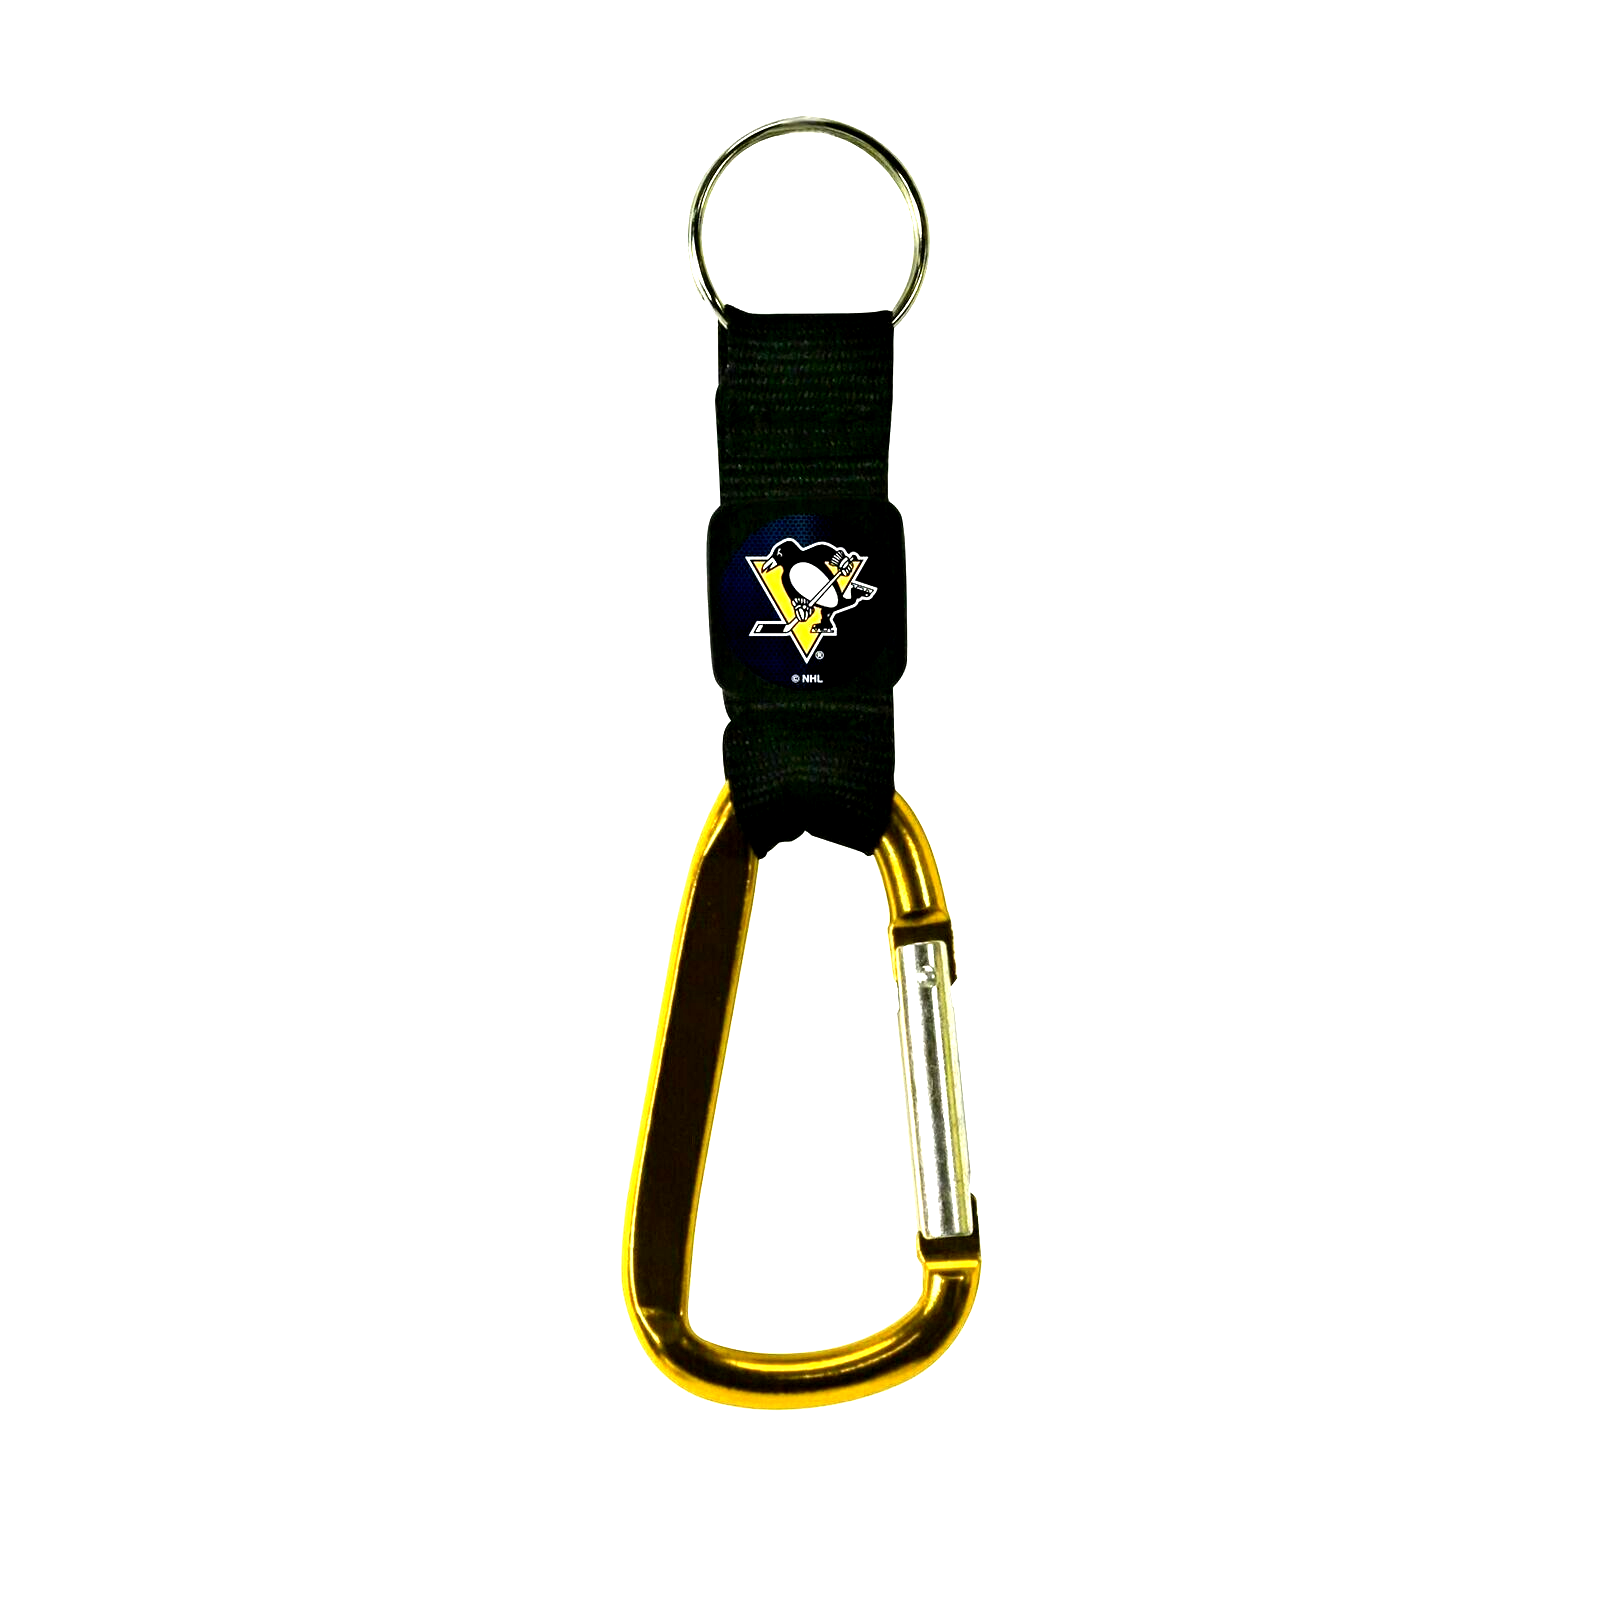 PITTSBURGH PENGUINS NAVI-BINER CARABINER KEYCHAIN KEYRING WITH COMPASS 6" NWT - $7.49